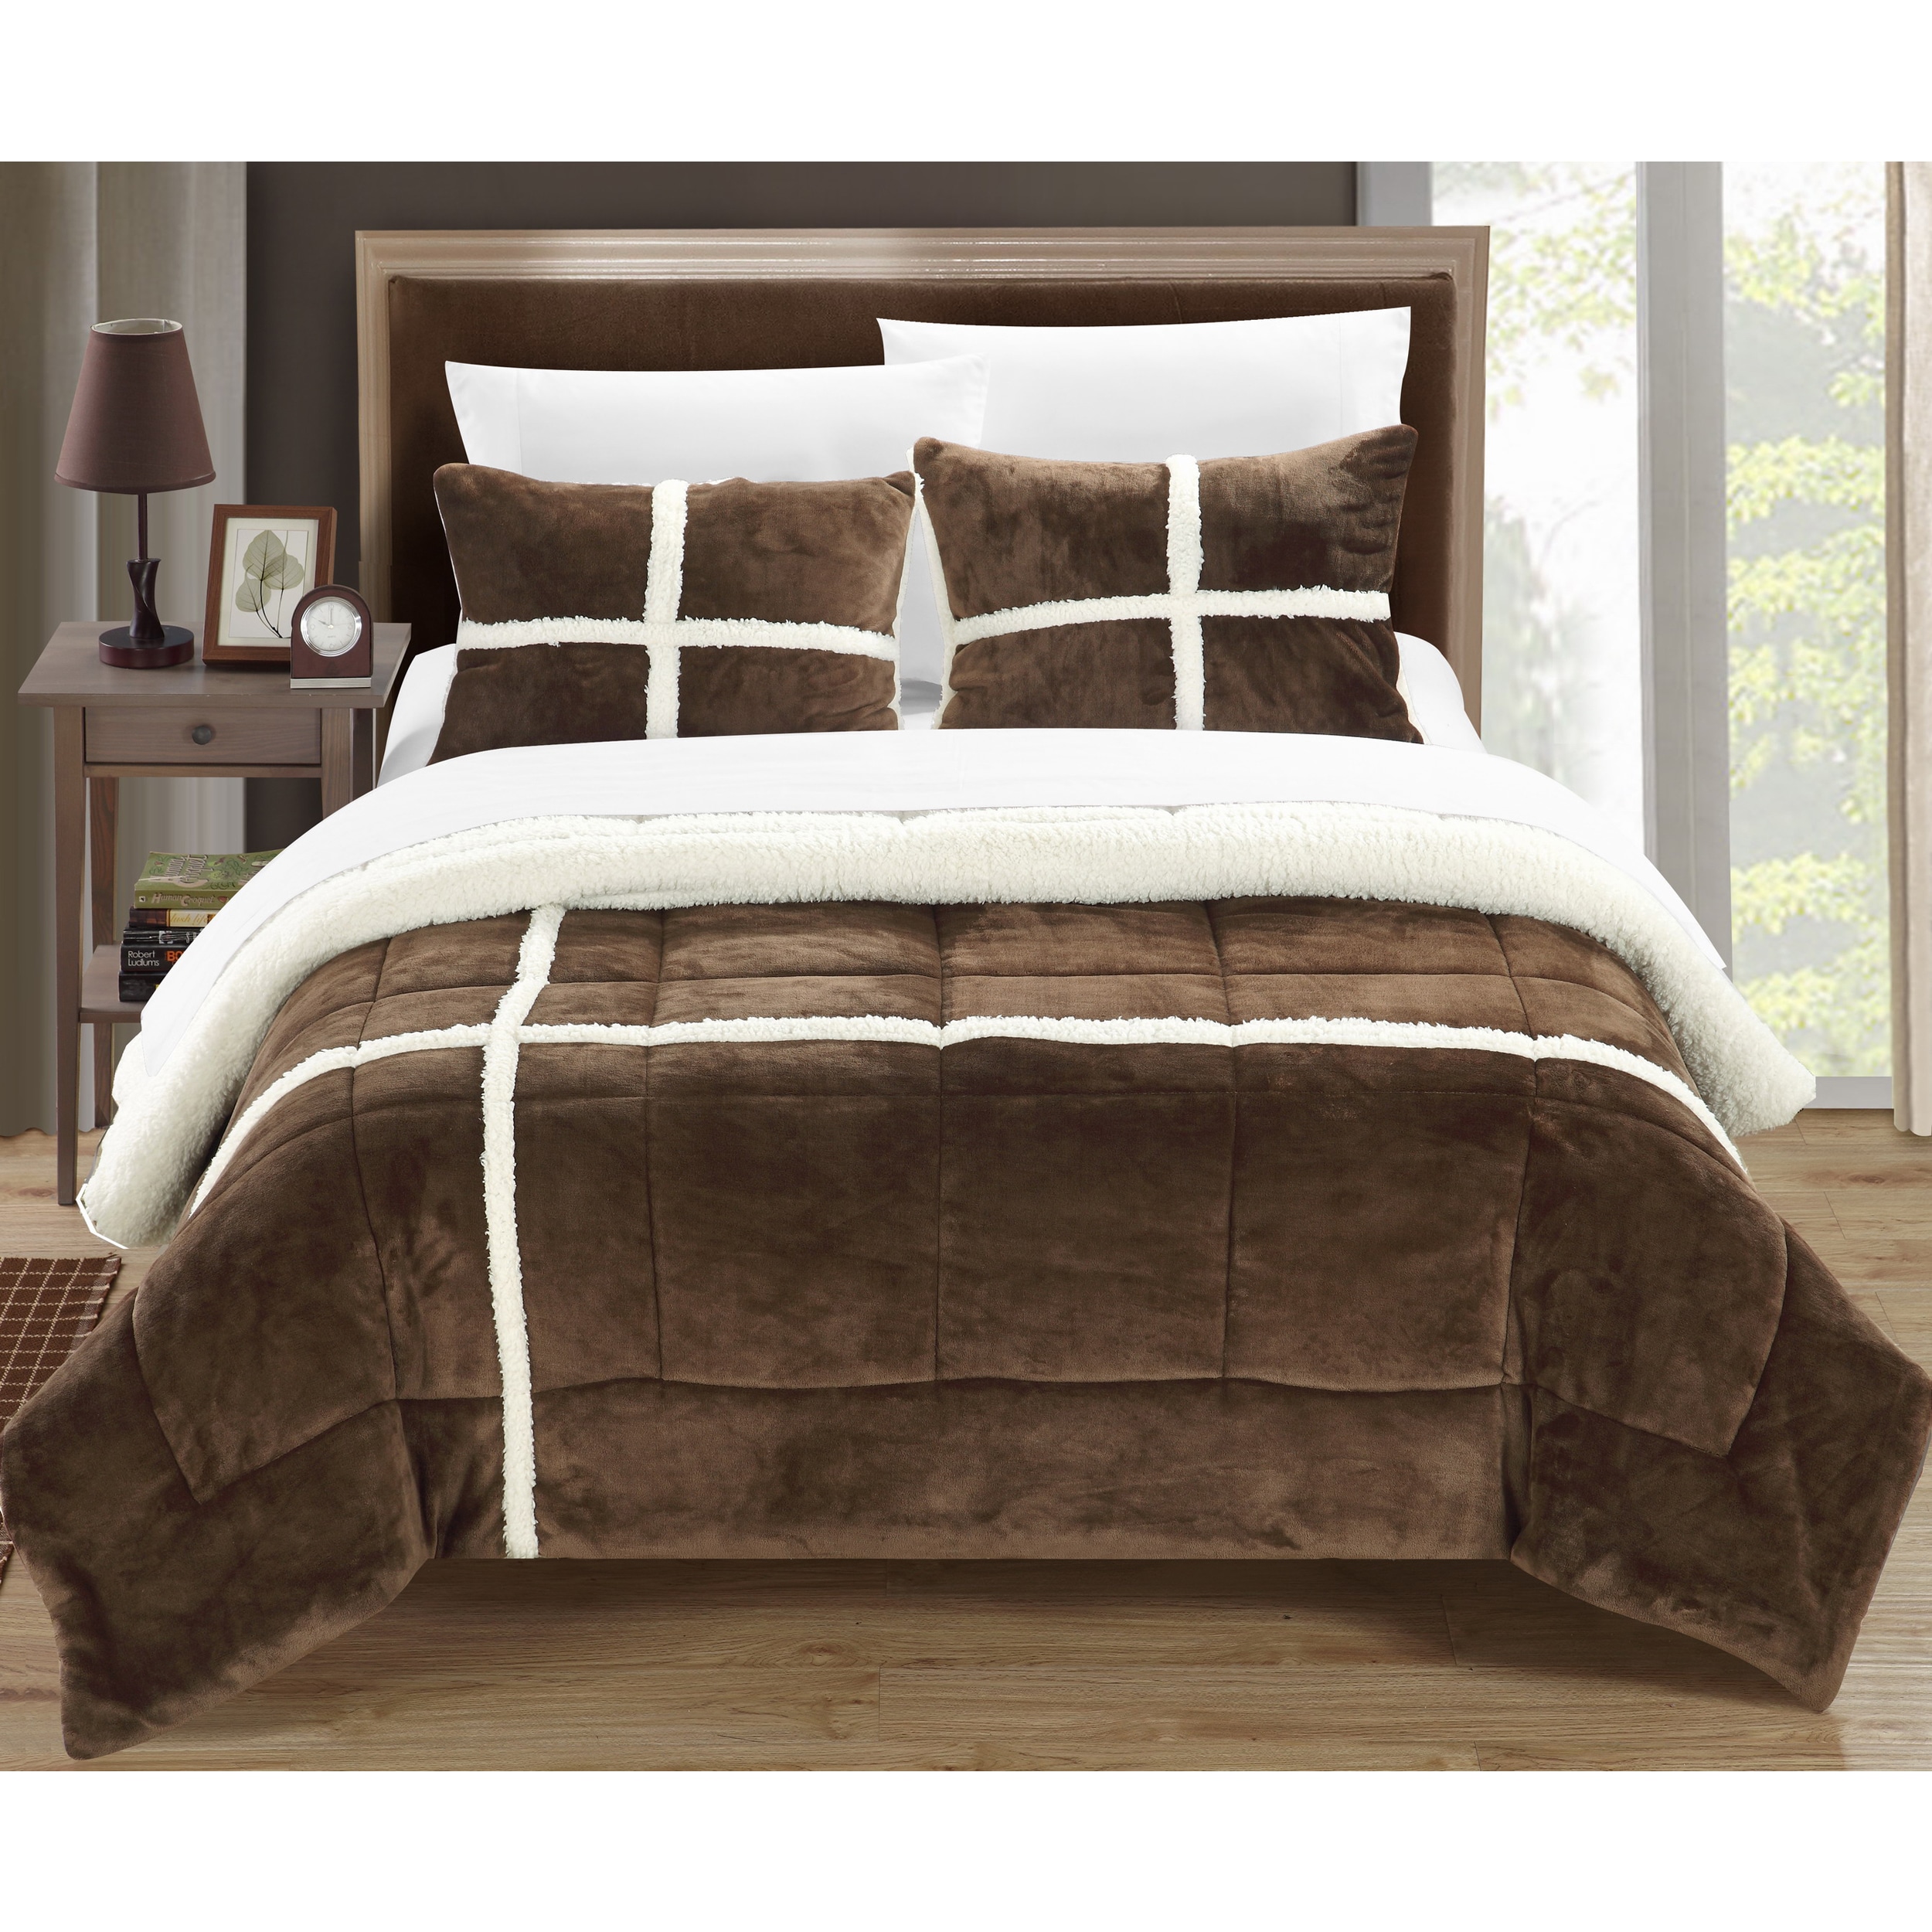 Chic Home Chiron Brown 7 Piece Comforter Set On Sale Overstock 14533377 King